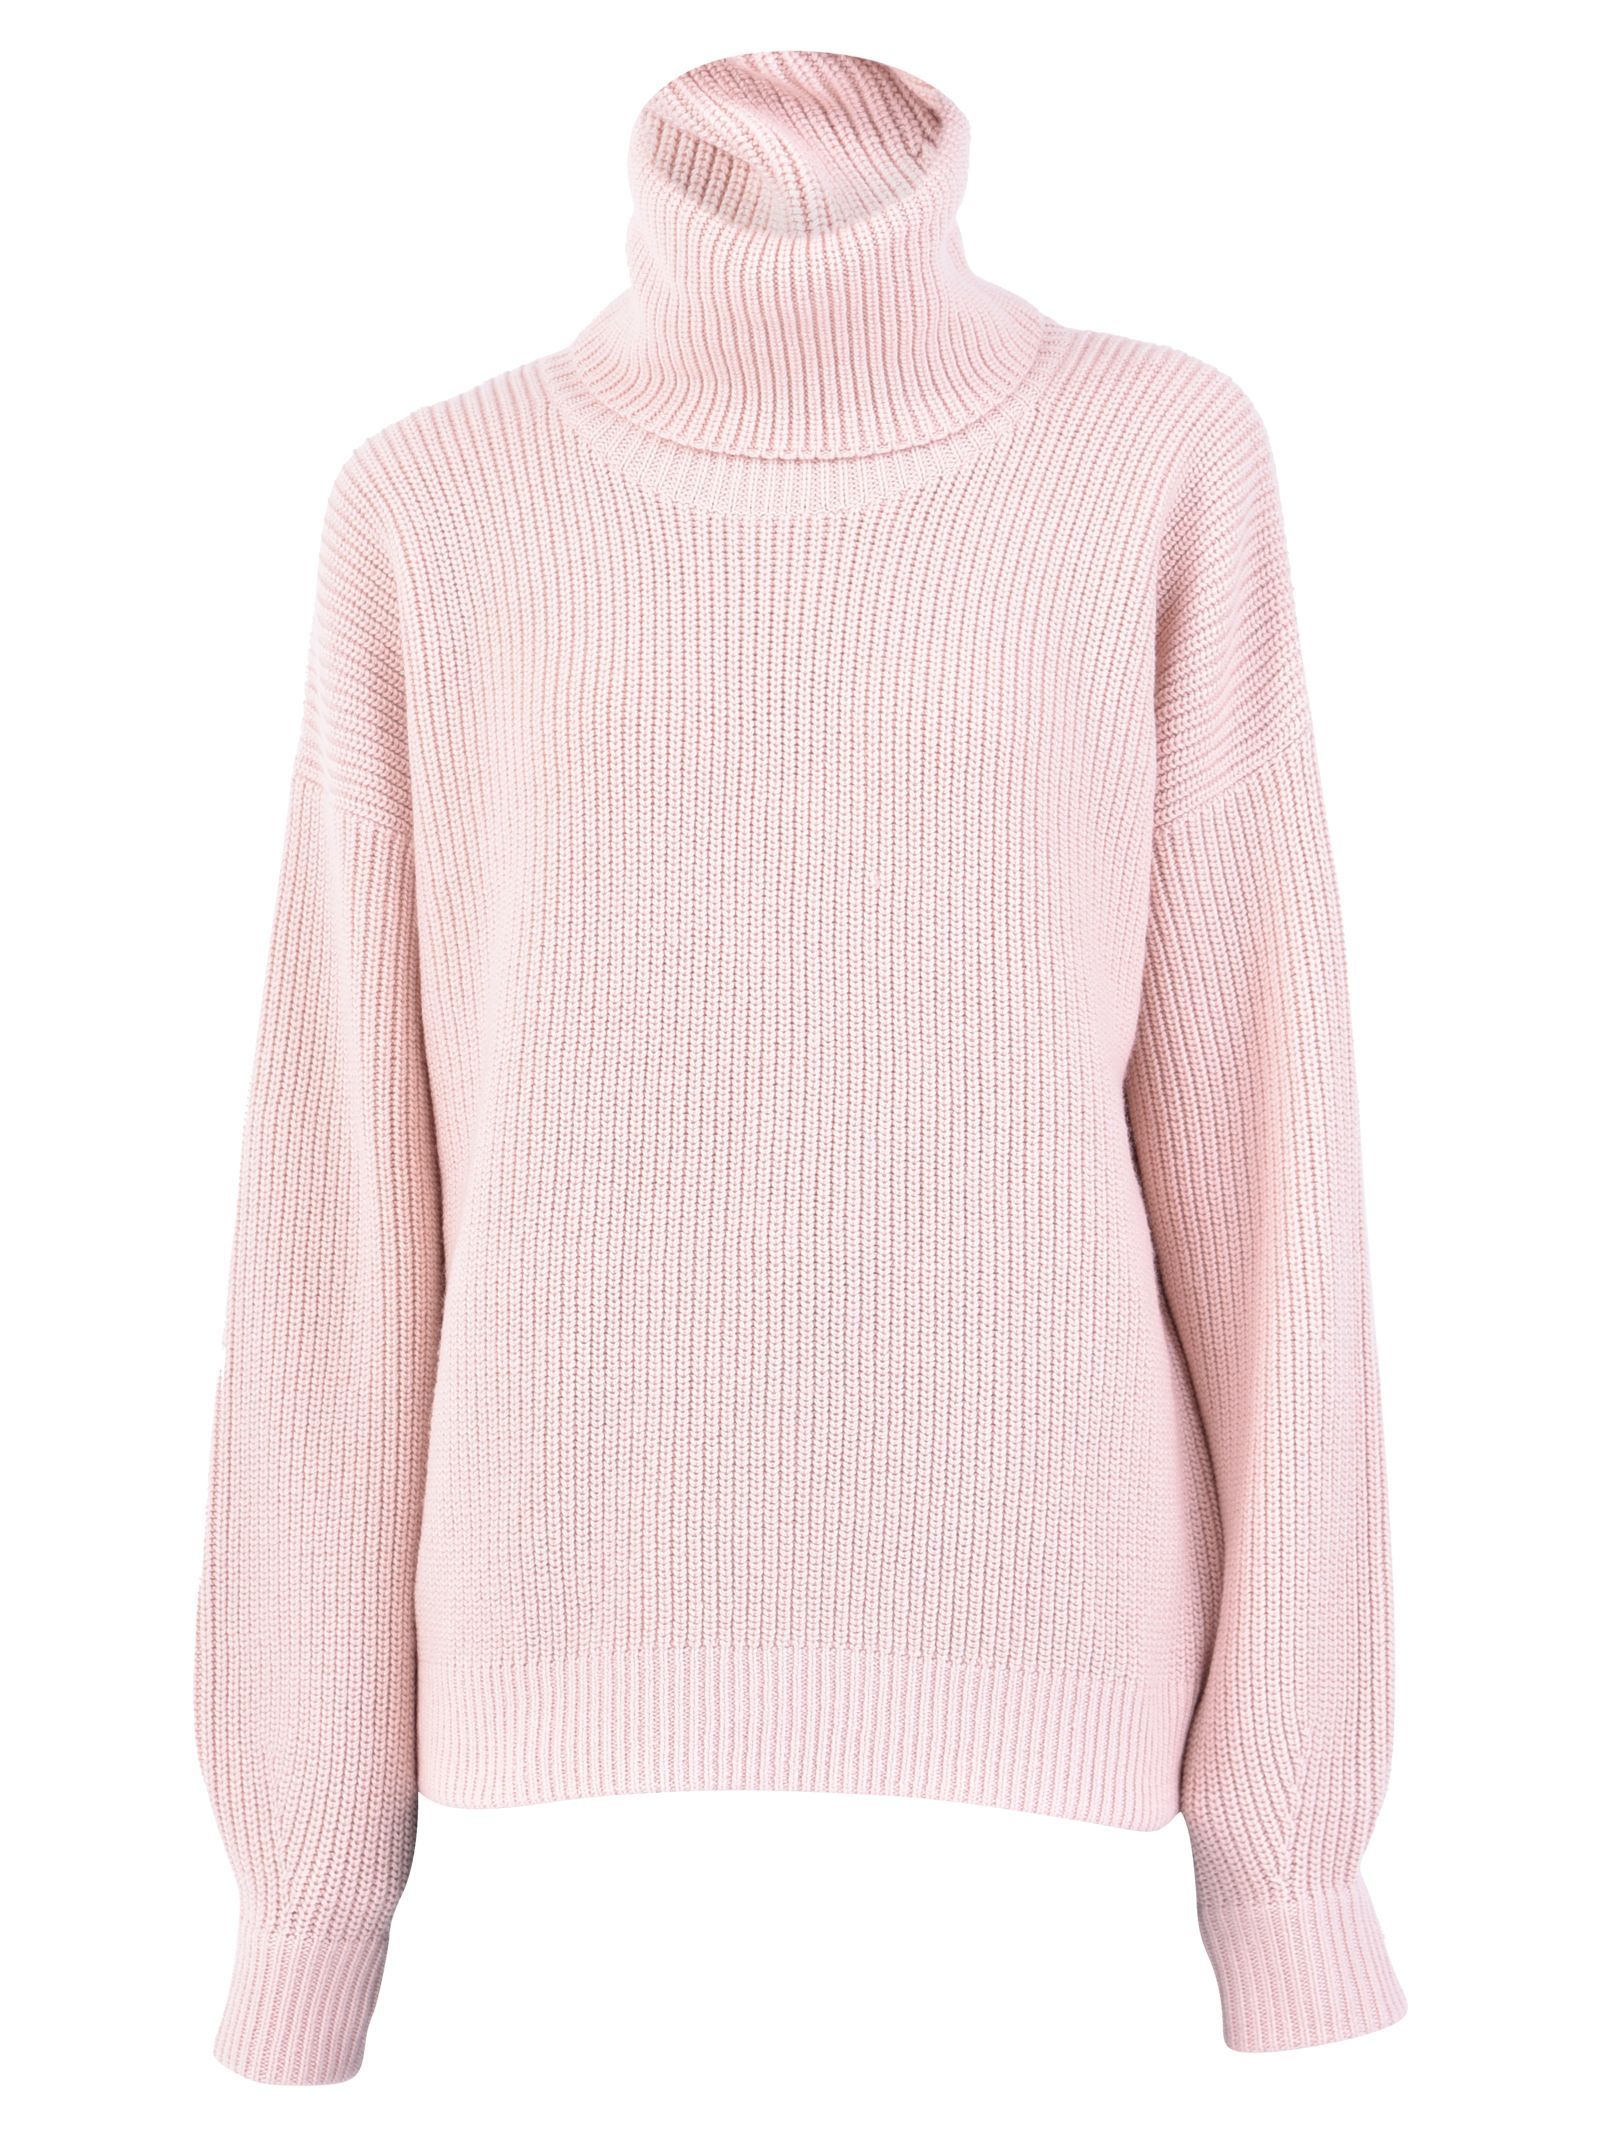 Pink Ribbed Sweater | Italist.com US